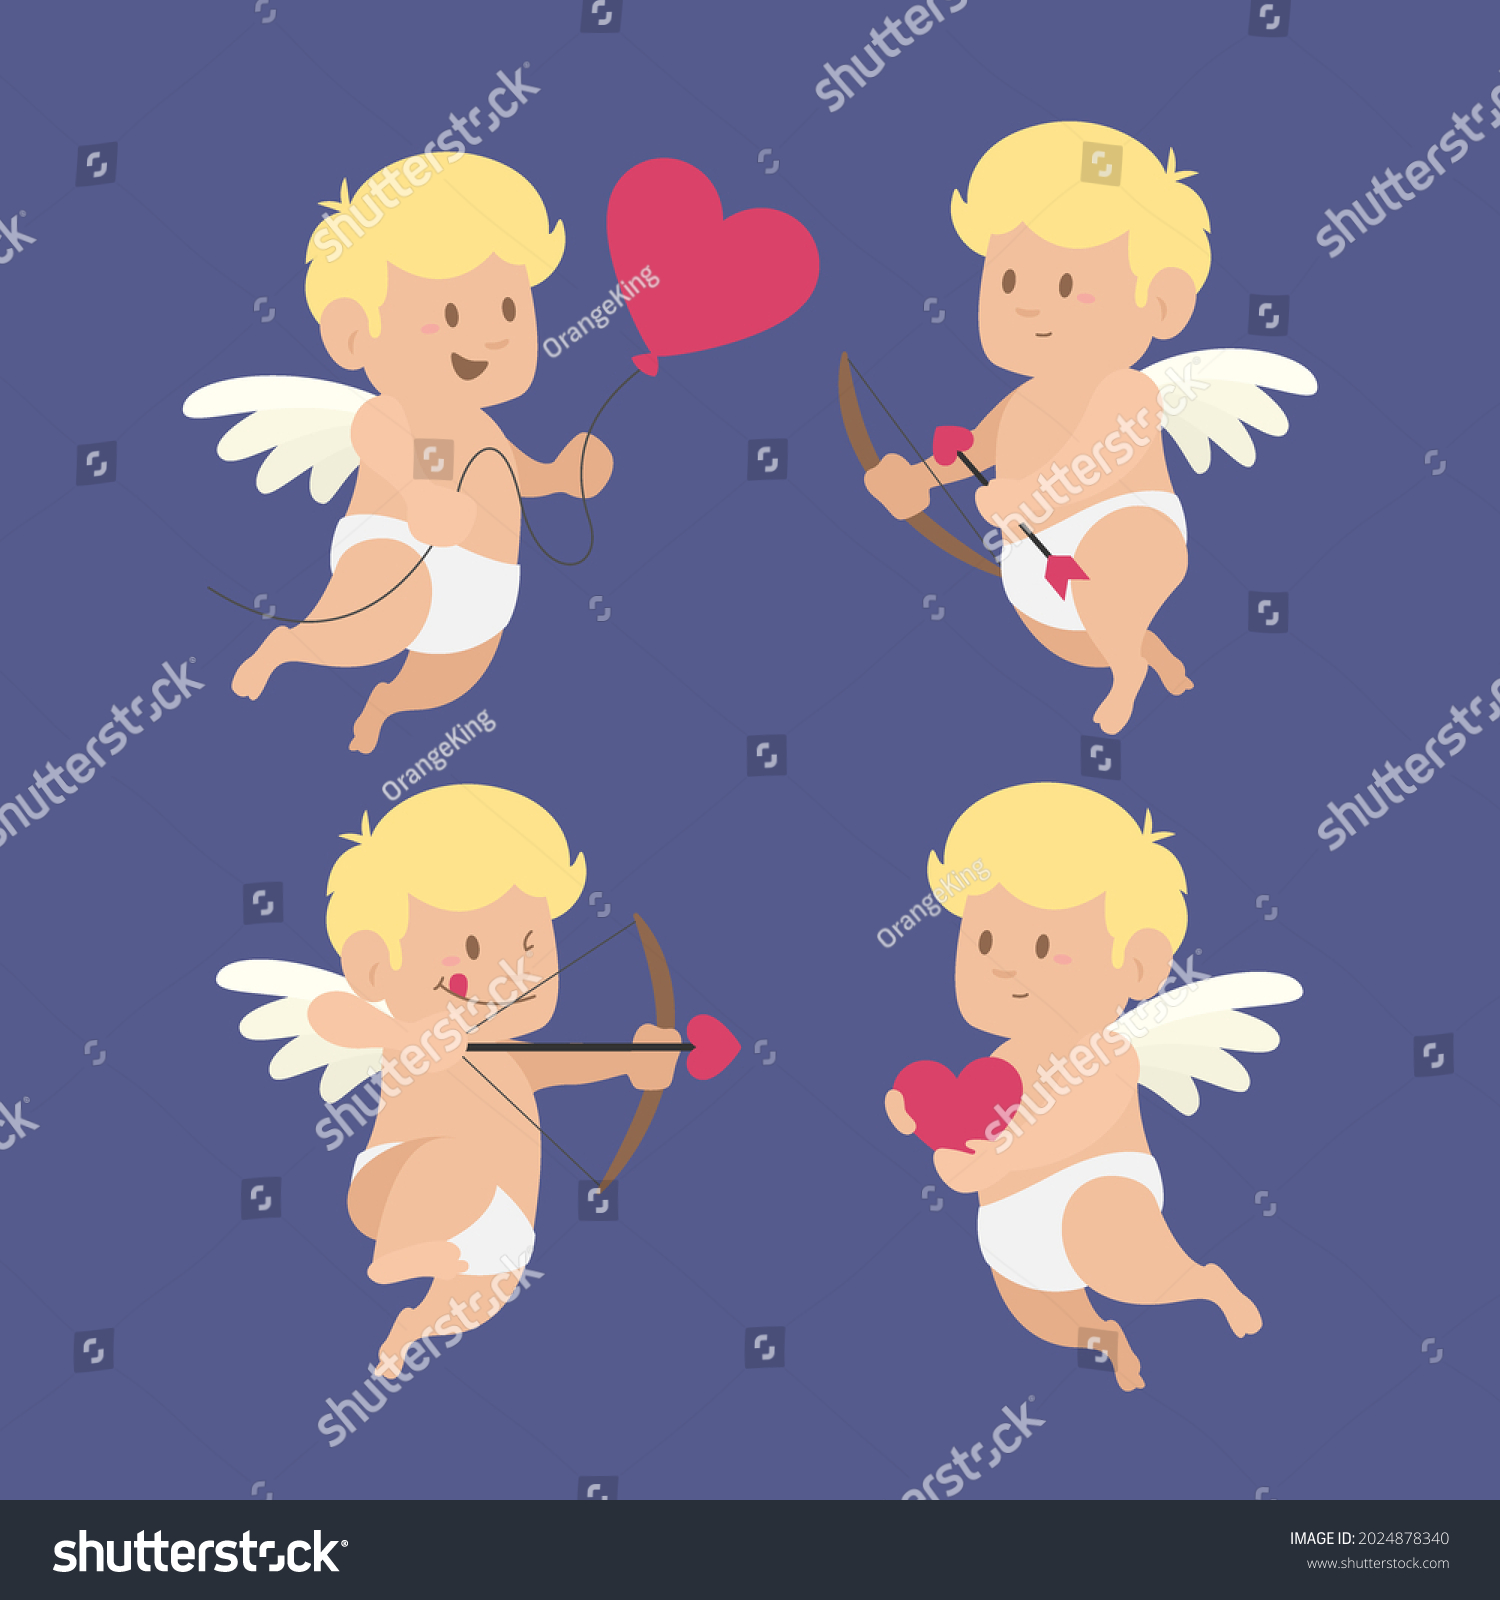 Cartoon Cupid Character Collection Angel Heart Stock Vector Royalty Free 2024878340 Shutterstock 8050